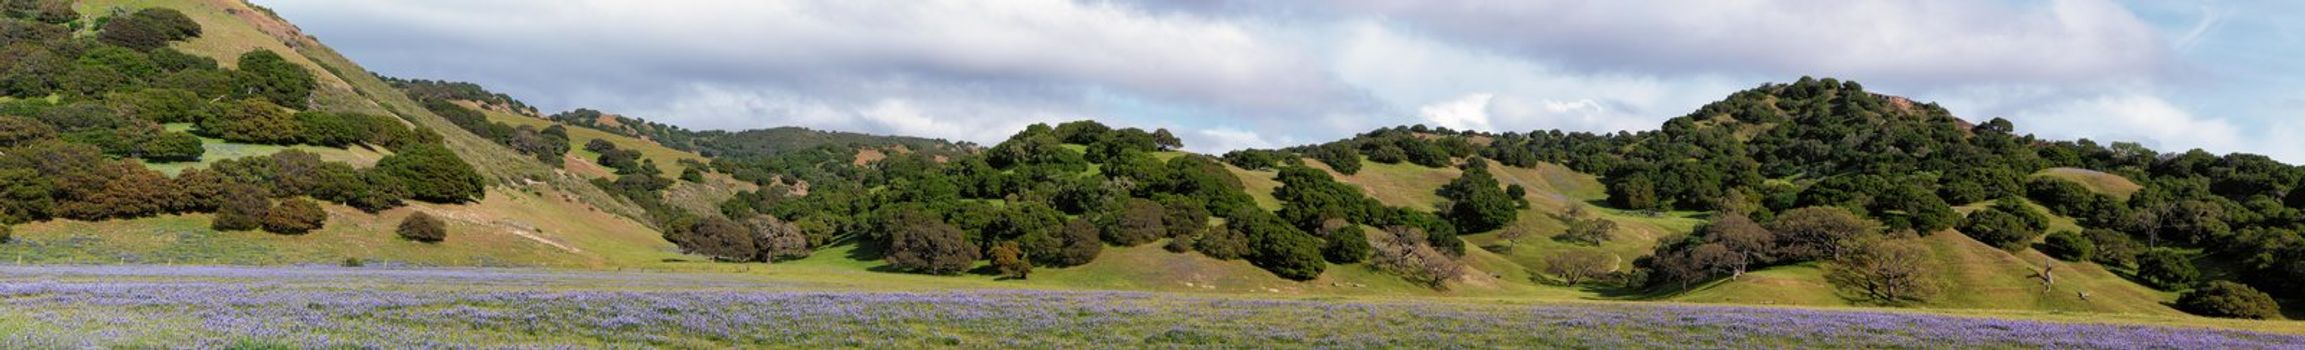 Panorama of Silver Lupine Growing Wild in Meadow in the Chaparral of California's Central Coast.